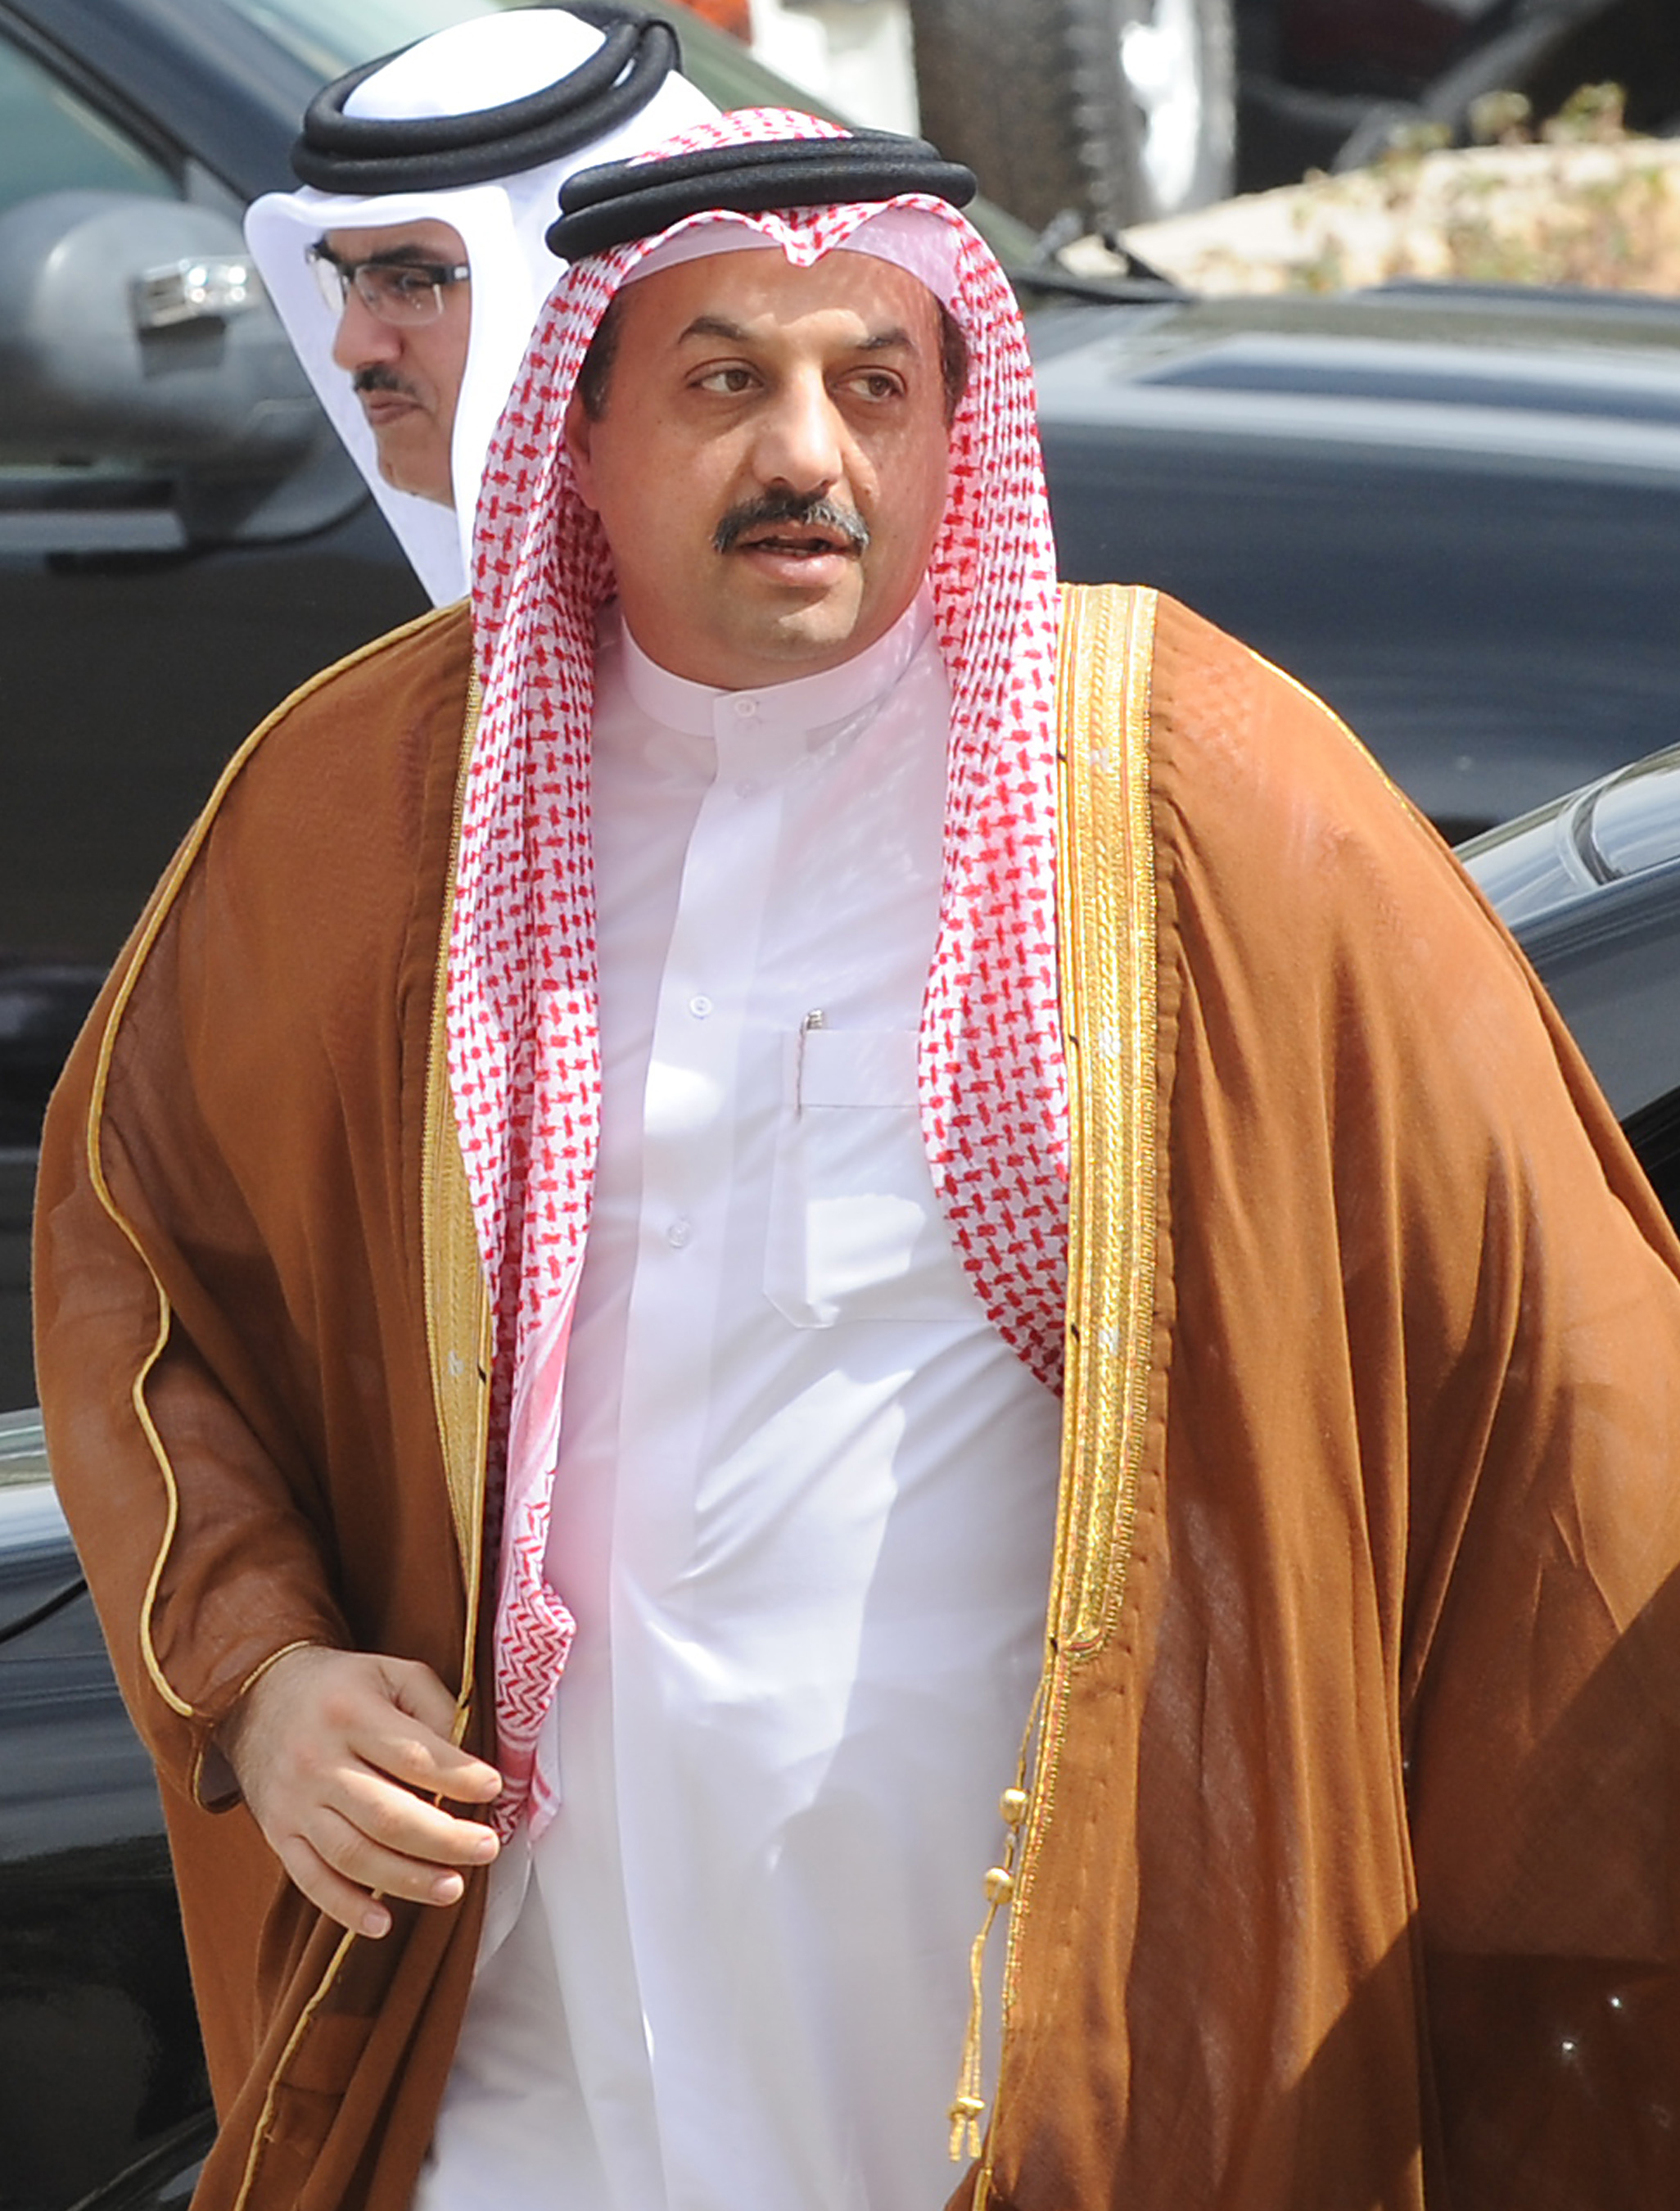 Qatari Foreign Minister Khalid bin Mohammed al-Attiyah arrives to attend the 130th meeting of the Foreign Ministers of the Gulf Cooperation Council (GCC) in Riyadh on March 4, 2014. (Fayez Nureldine—AFP/Getty Images)